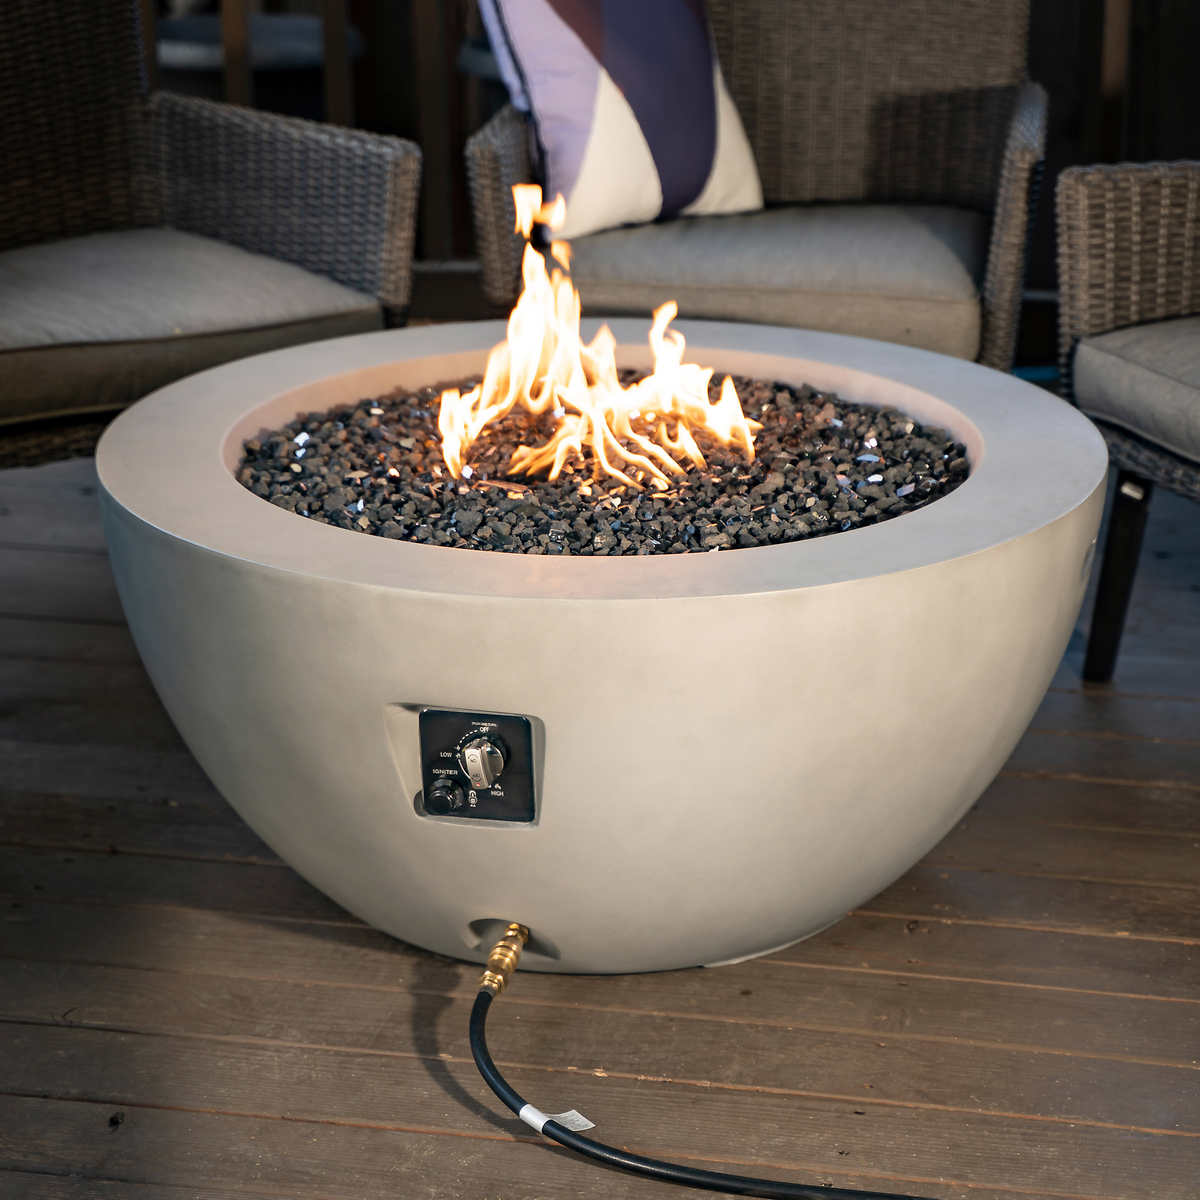 Faux Concrete Gas Fire Pit Costco, Is It Safe To Use A Gas Fire Pit On Deck